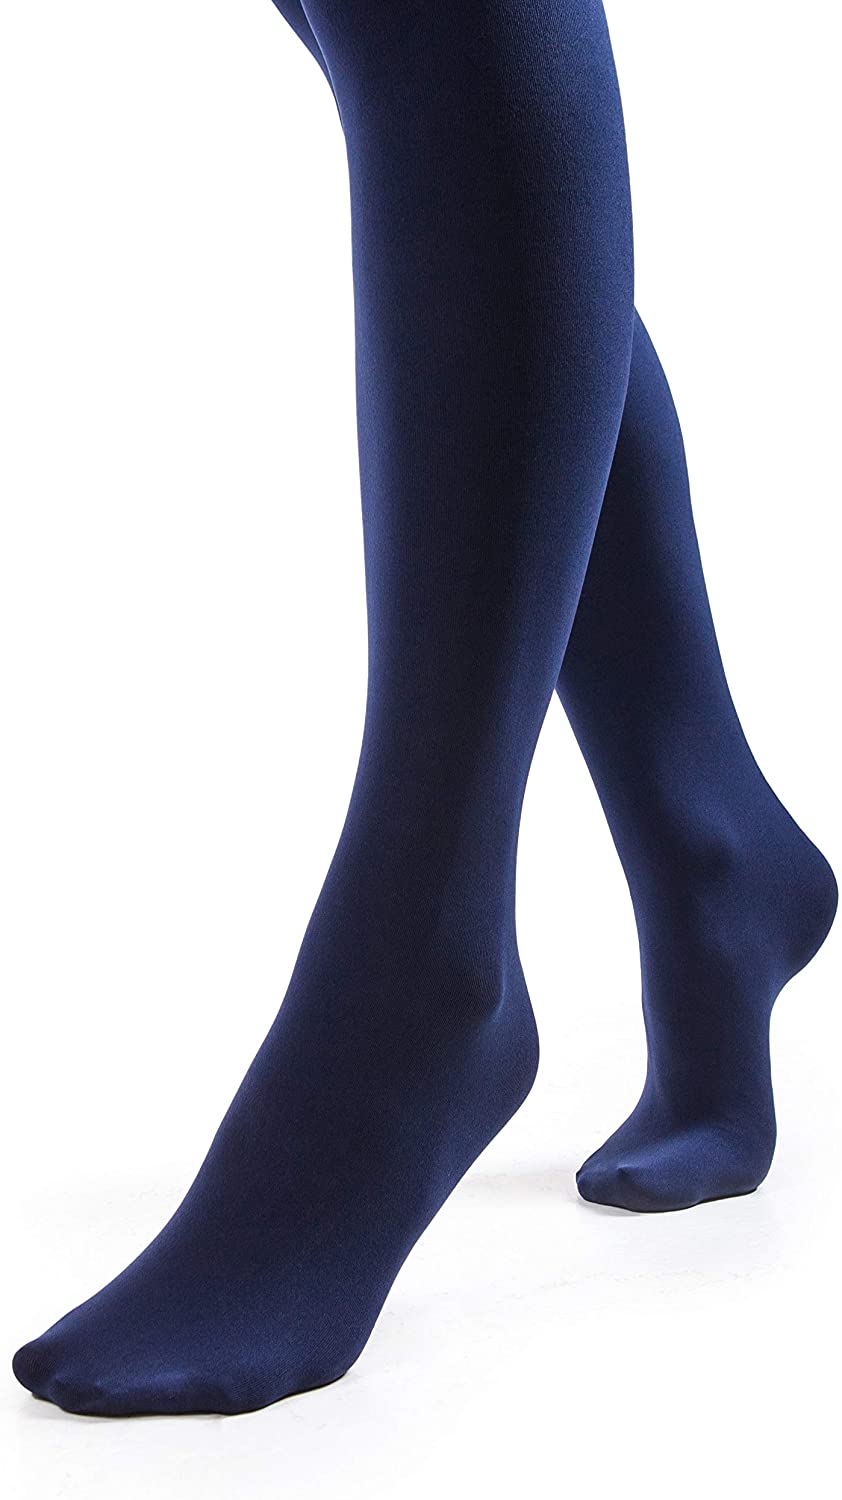 sofsy Super Opaque Tights for Women - Winter Thermal Stockings, Navy ...